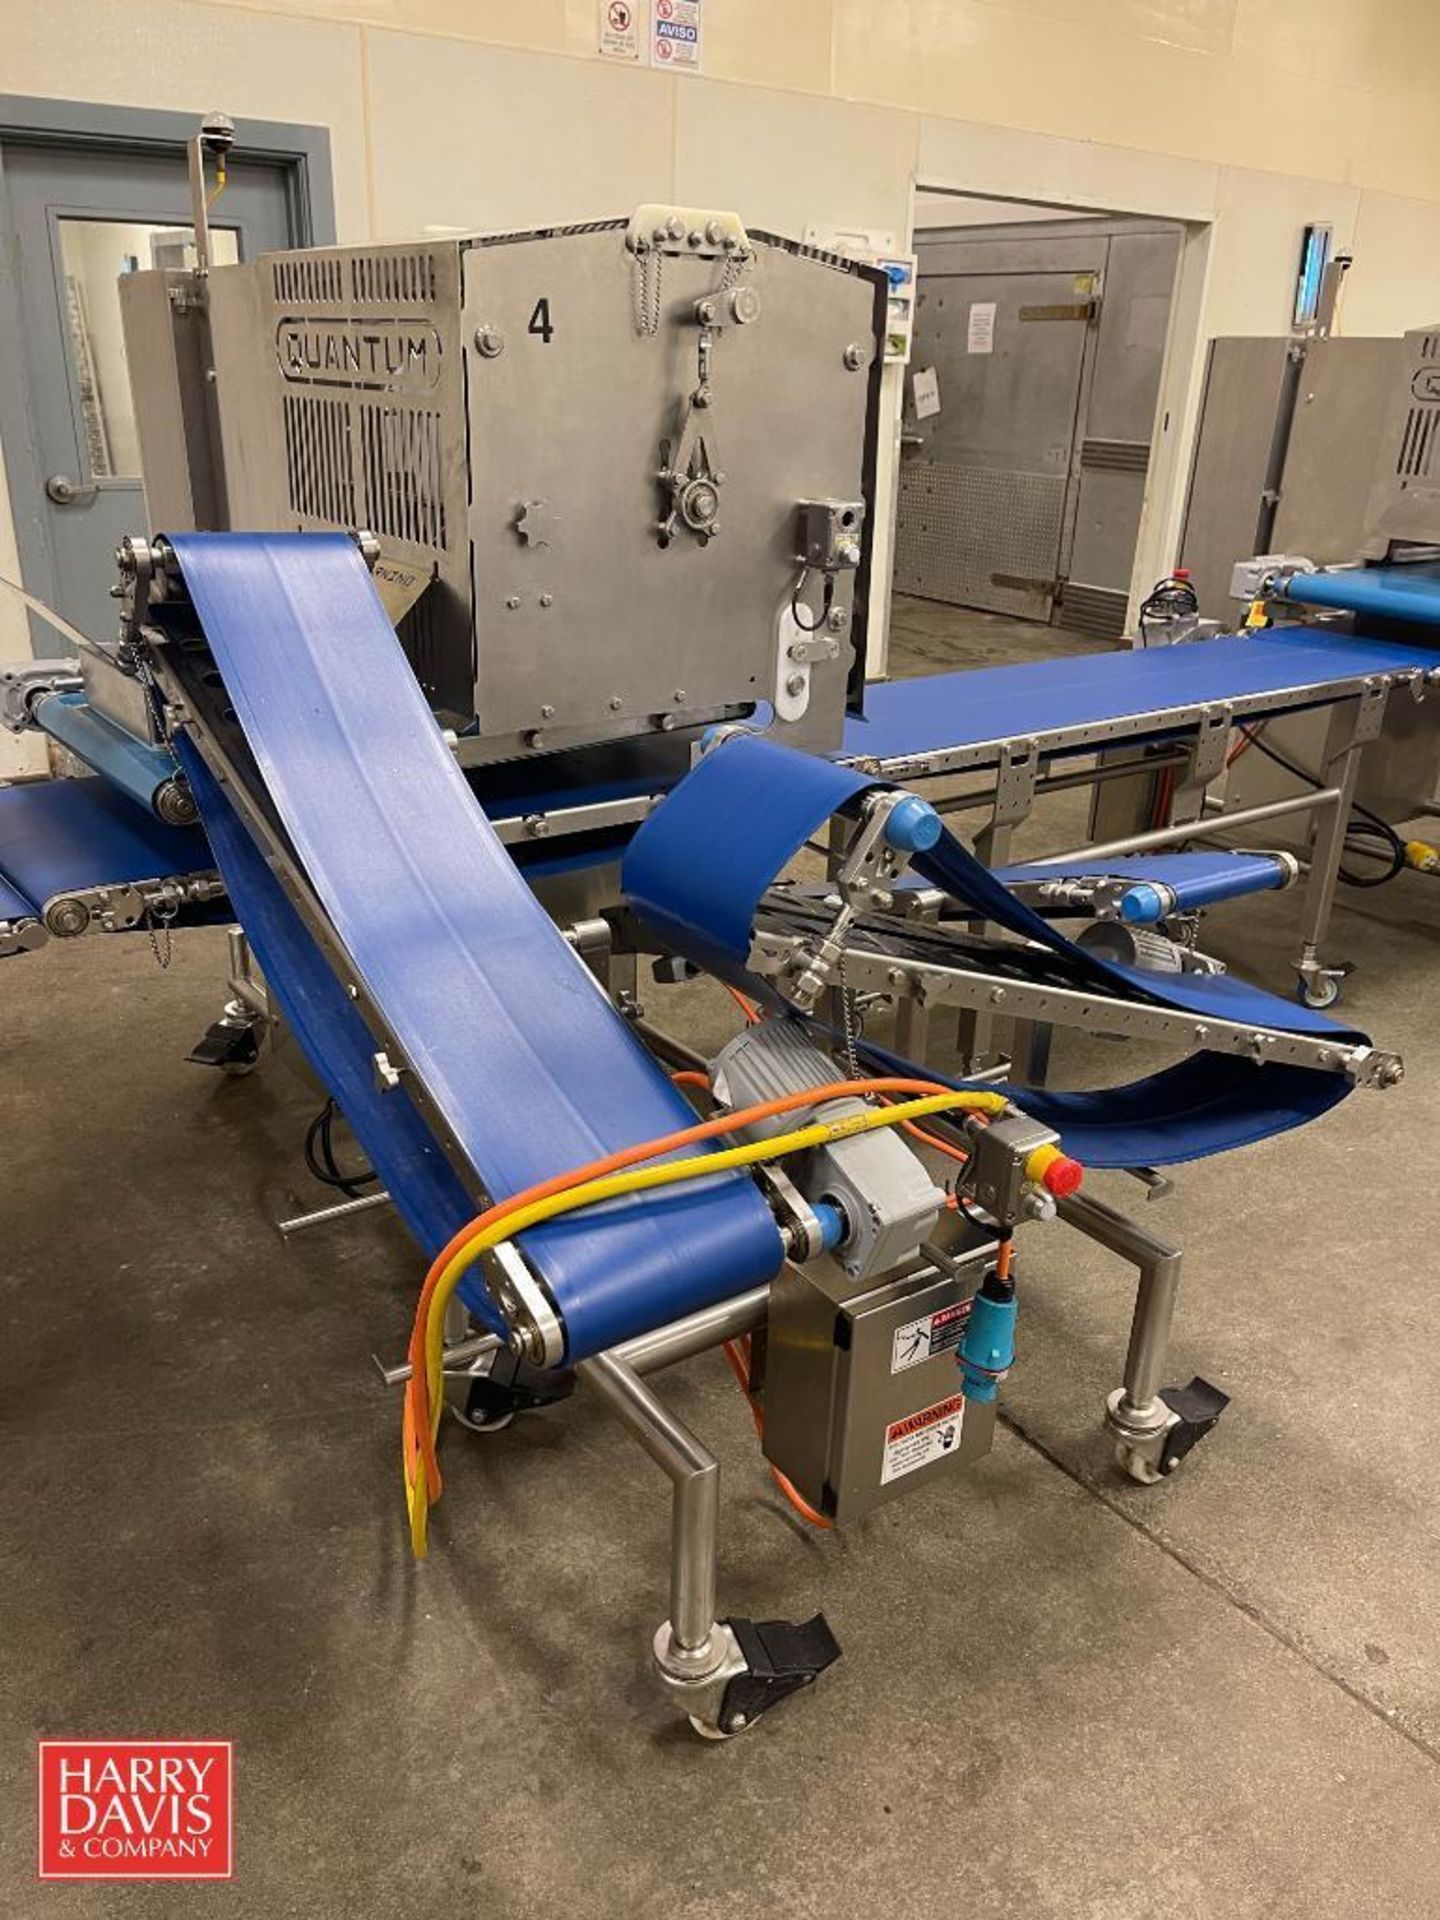 2019 Quantum Waterfall Topping Applicator, Model: TC-5, S/N: TC5190002 with S/S Reclaim Conveyor - Image 3 of 4